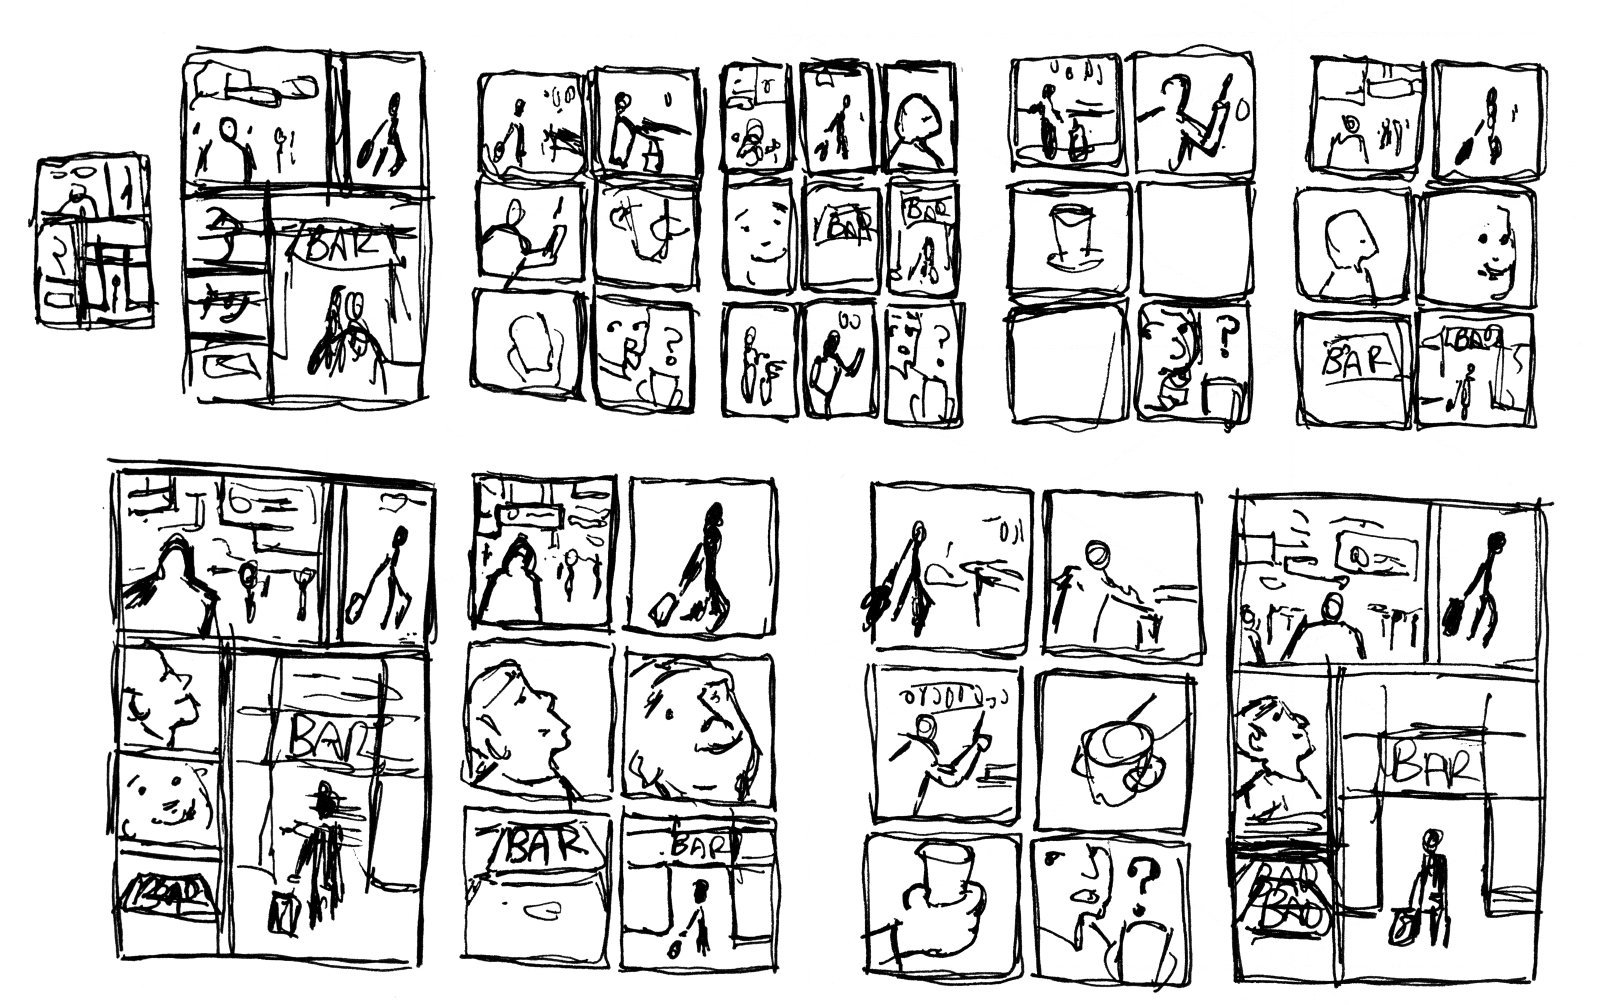 Some examples of thumbnails I did for this script